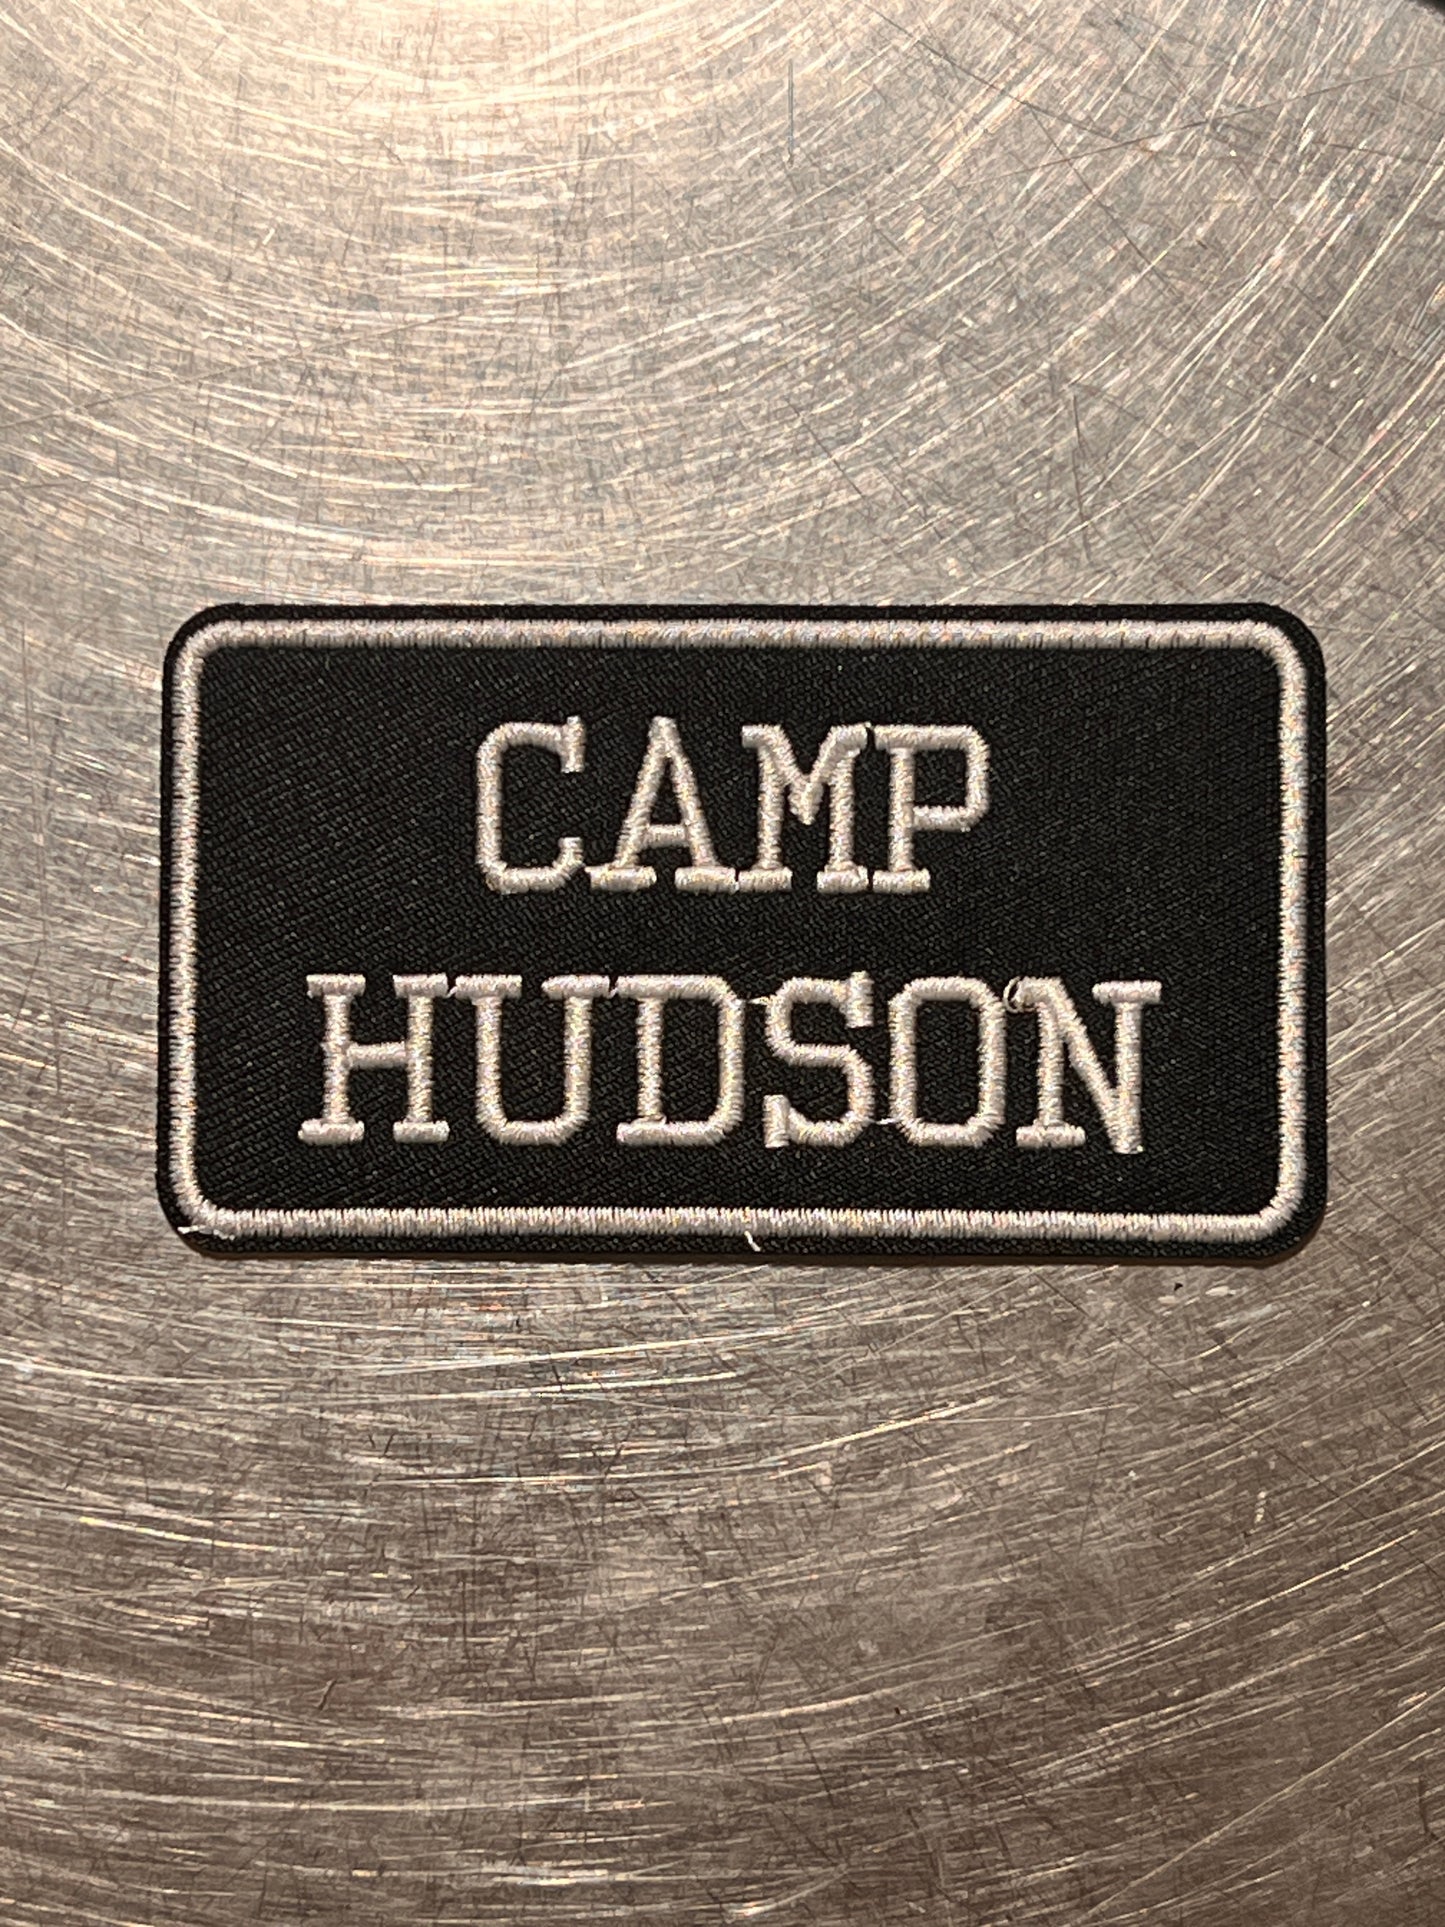 ‘CAMP HUDSON’ embroidered patch